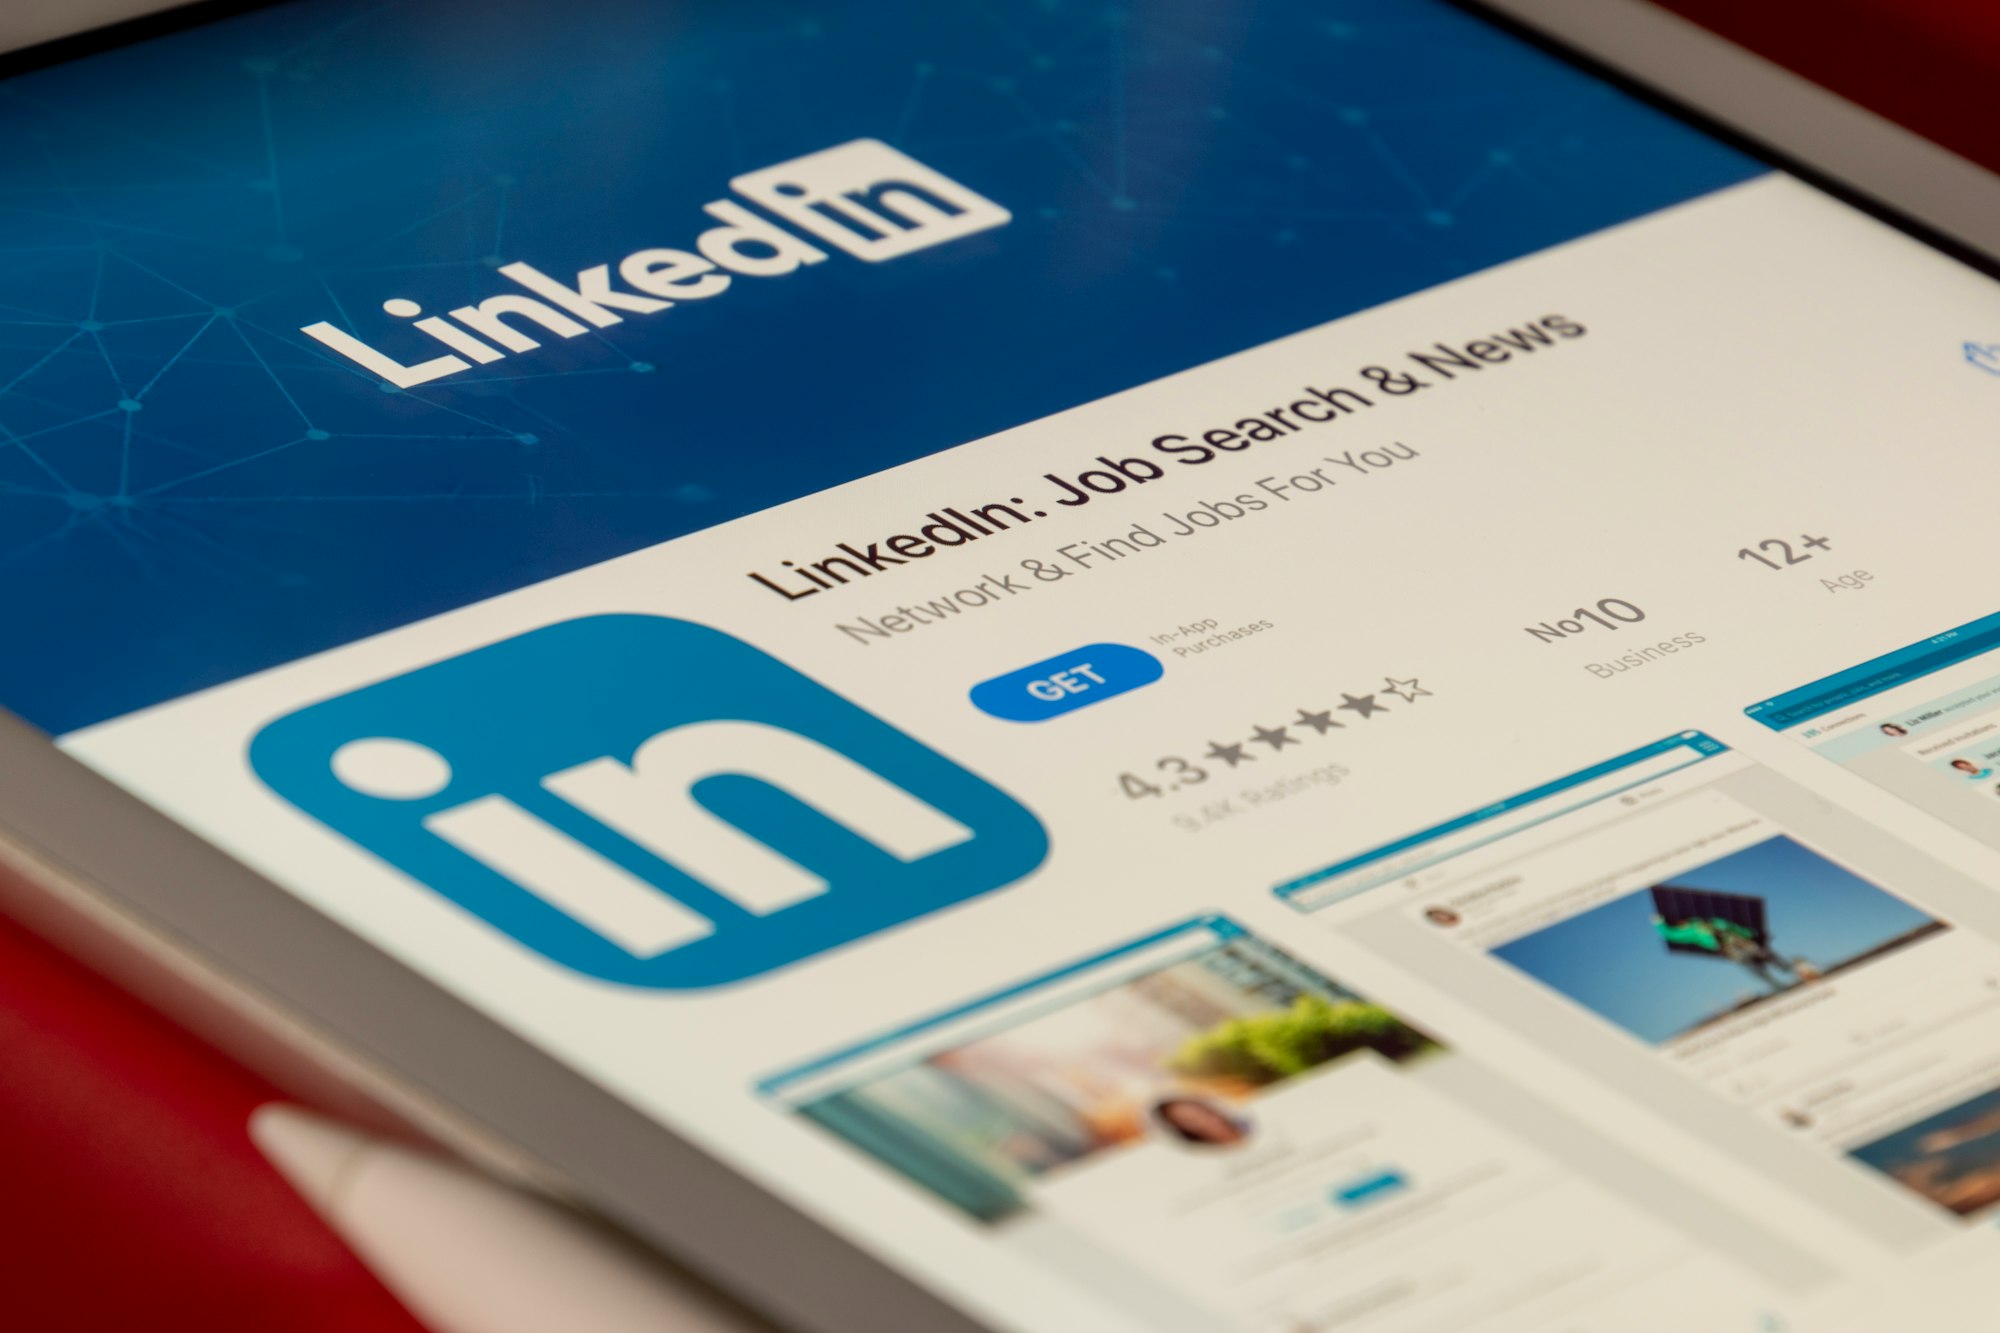 LinkedIn Launches New Verification Feature to Confirm Users' Identity